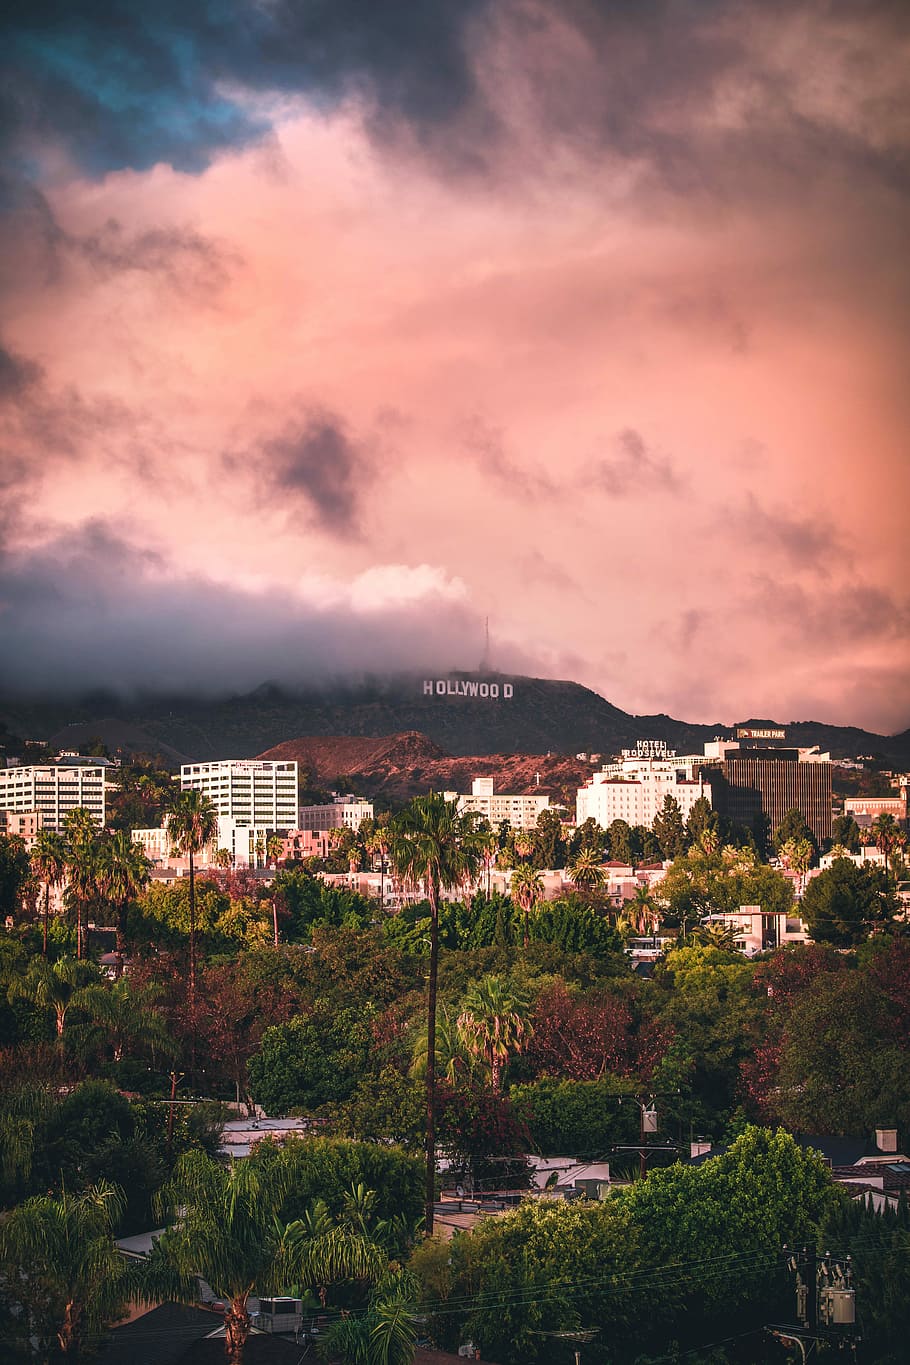 Hd Wallpaper Hollywood Sign From Los Angeles Photo Of Hollywood